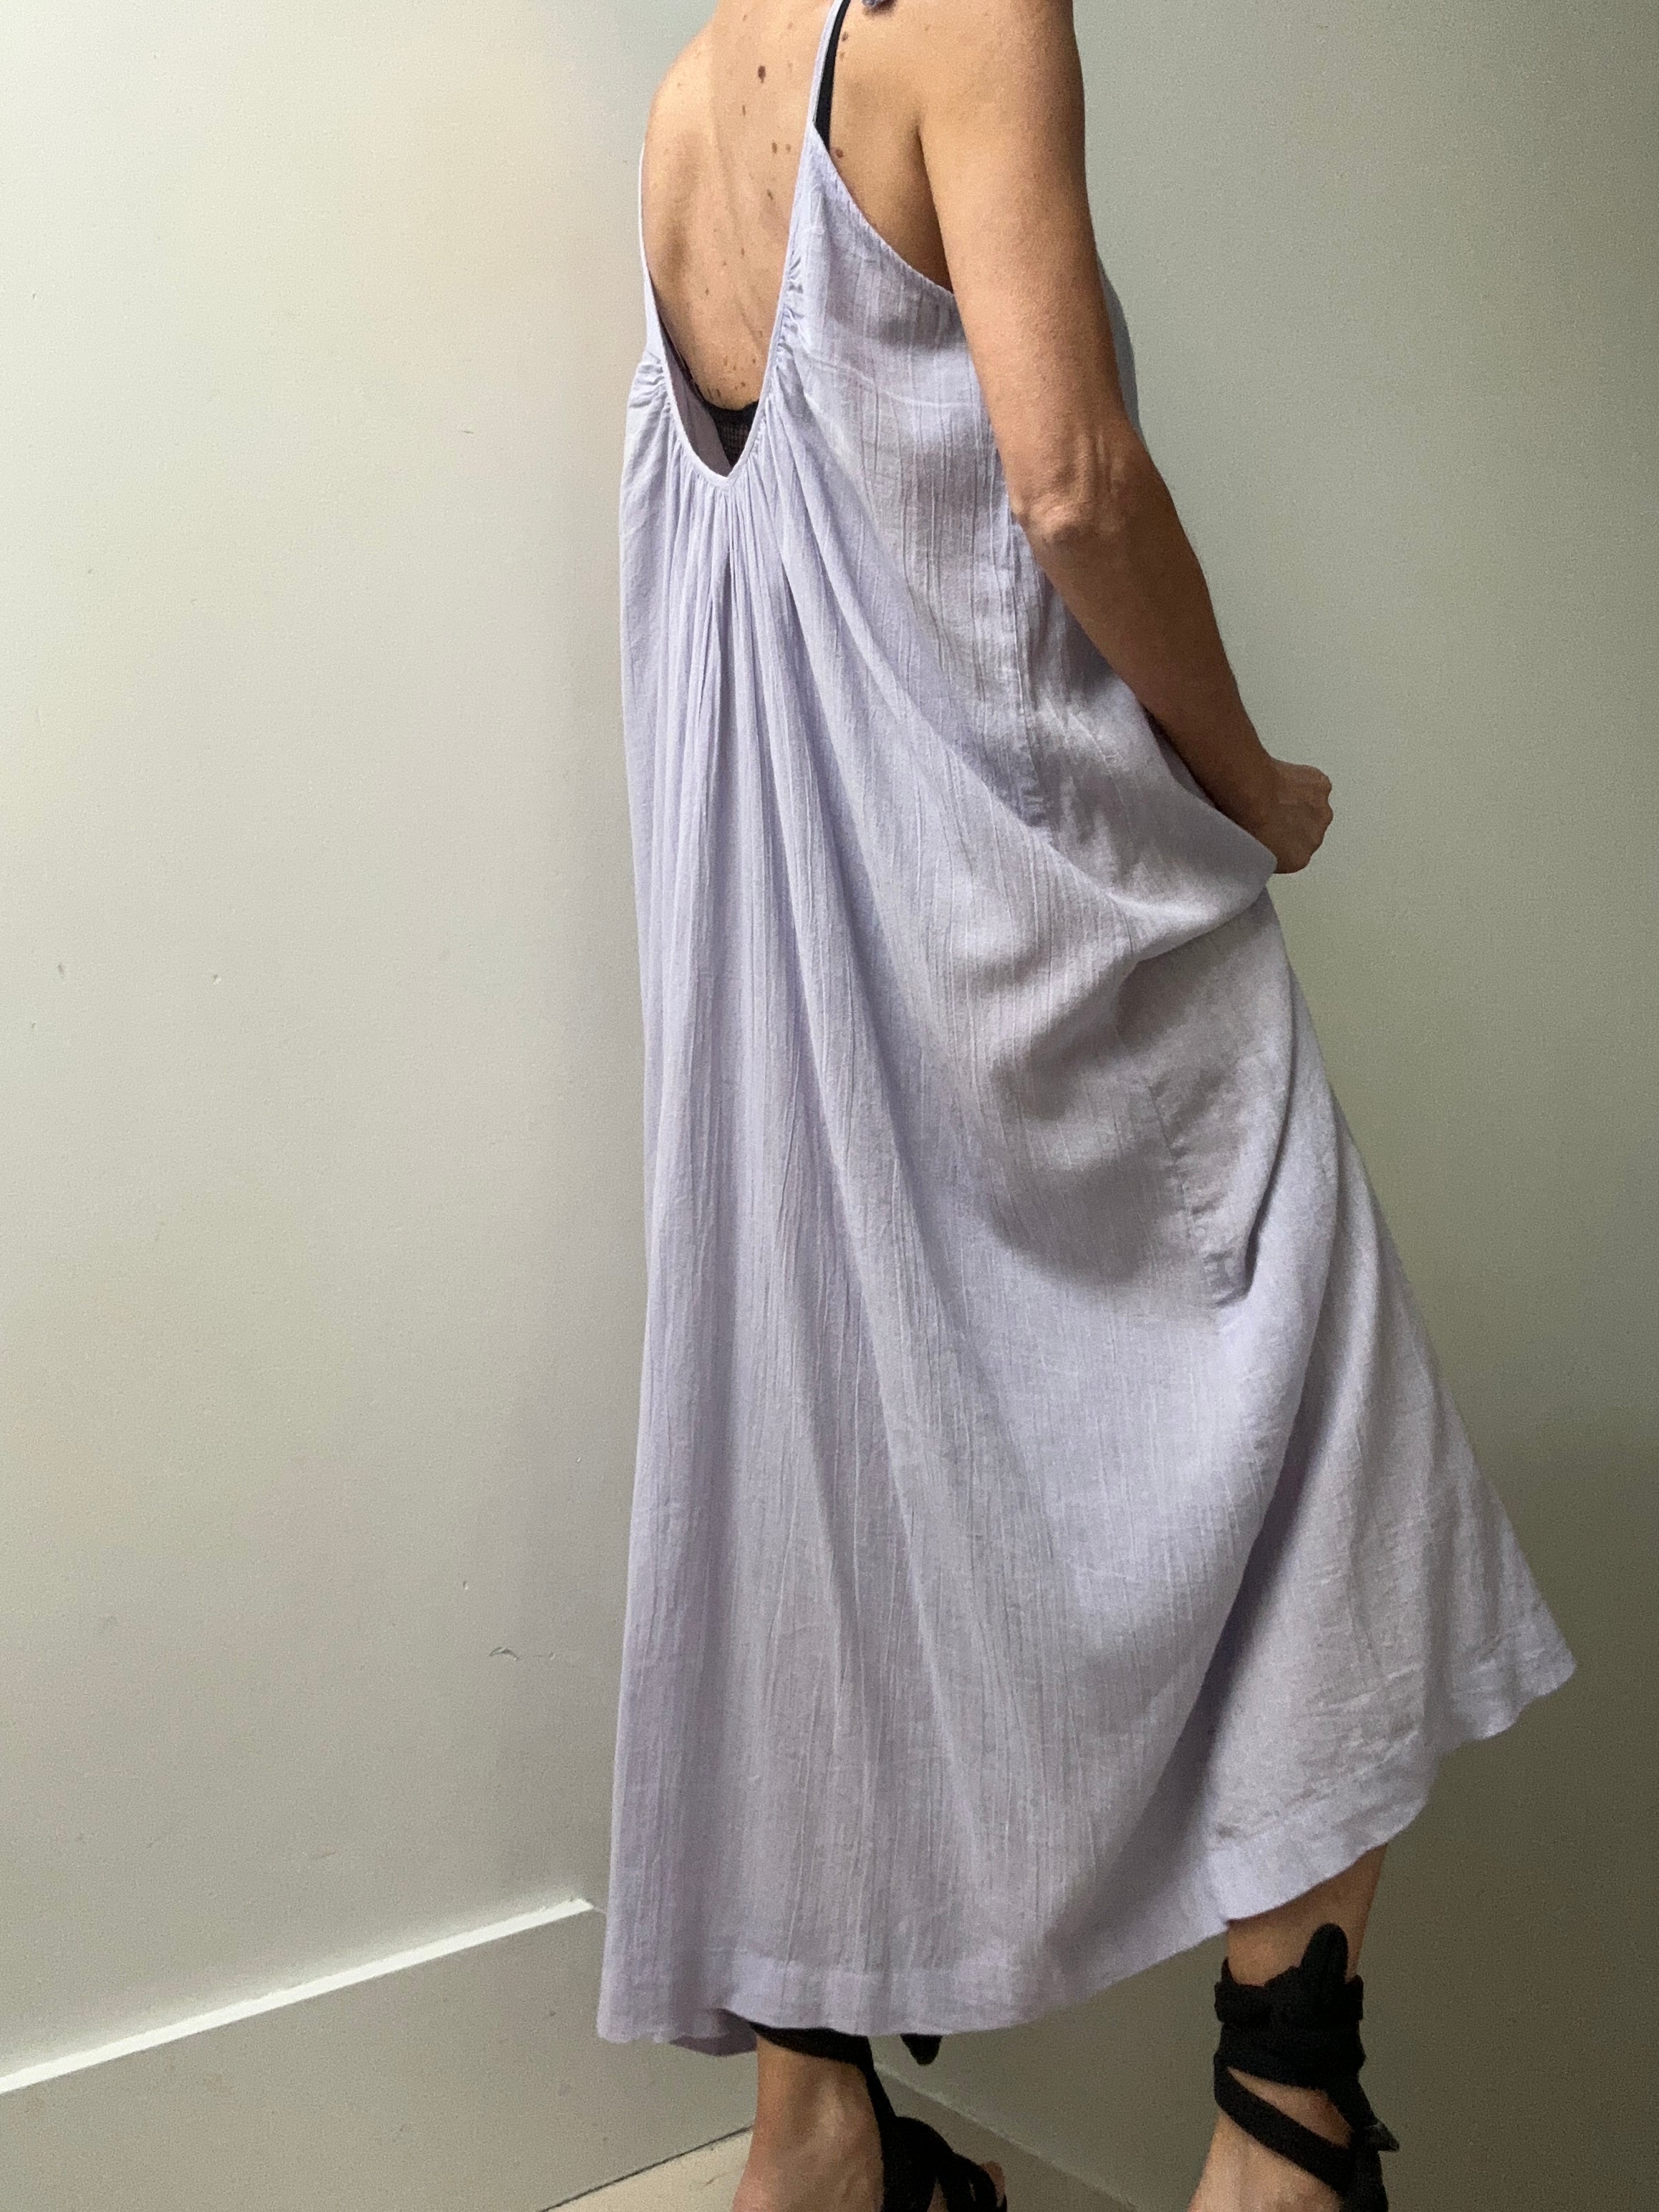 Jetsetbohemian Dresses One Size Tie Strap Cotton Dress in Lilac